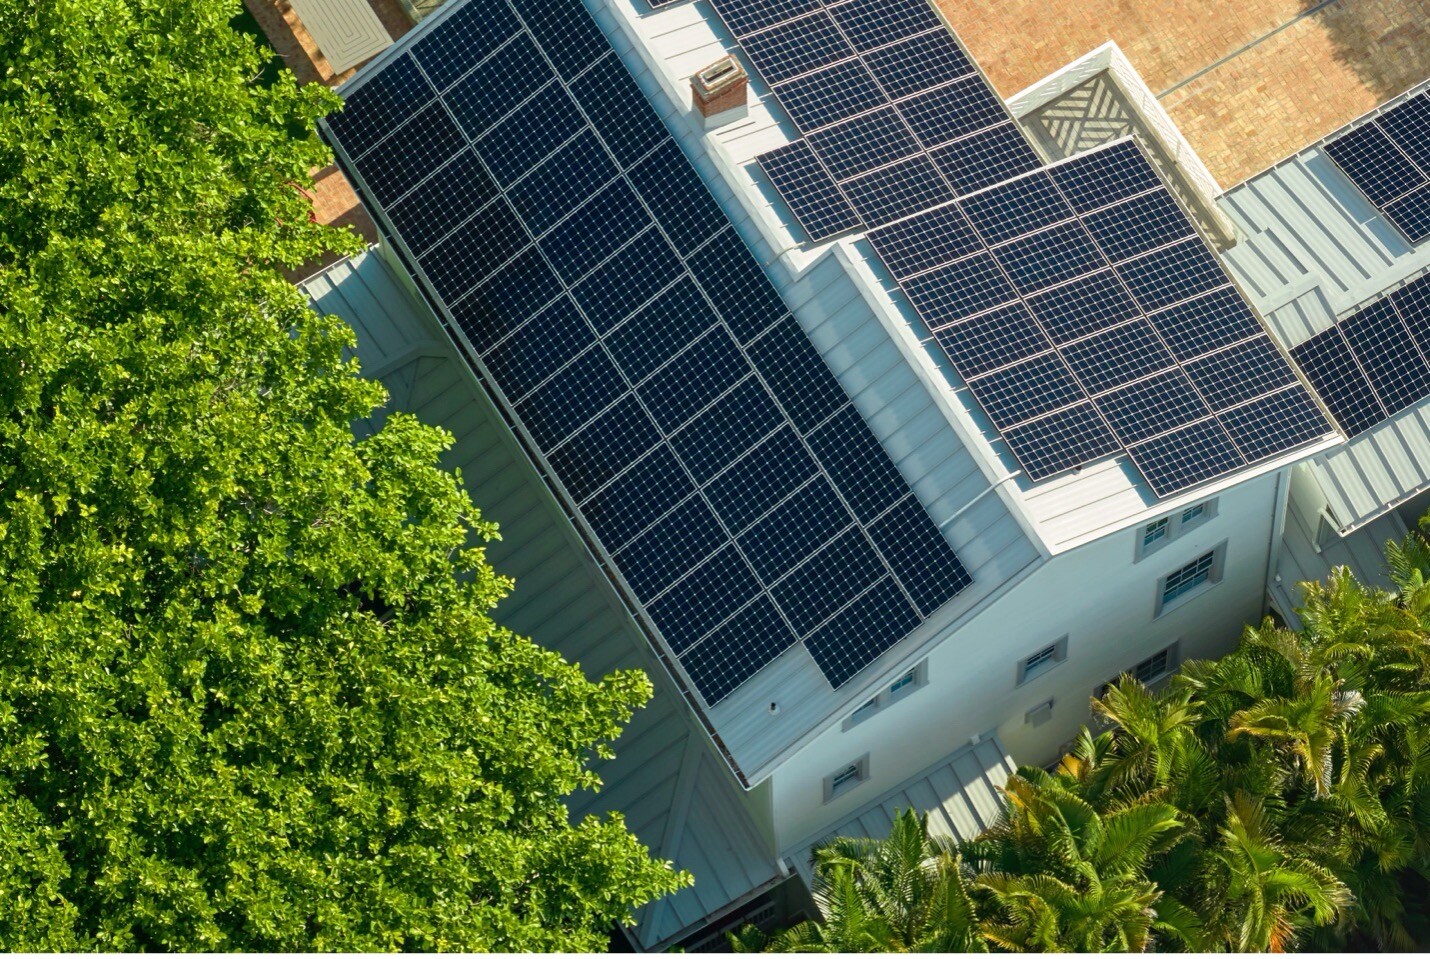 Read: How to Evaluate a New Solar Provider: Questions to Ask Before Committing